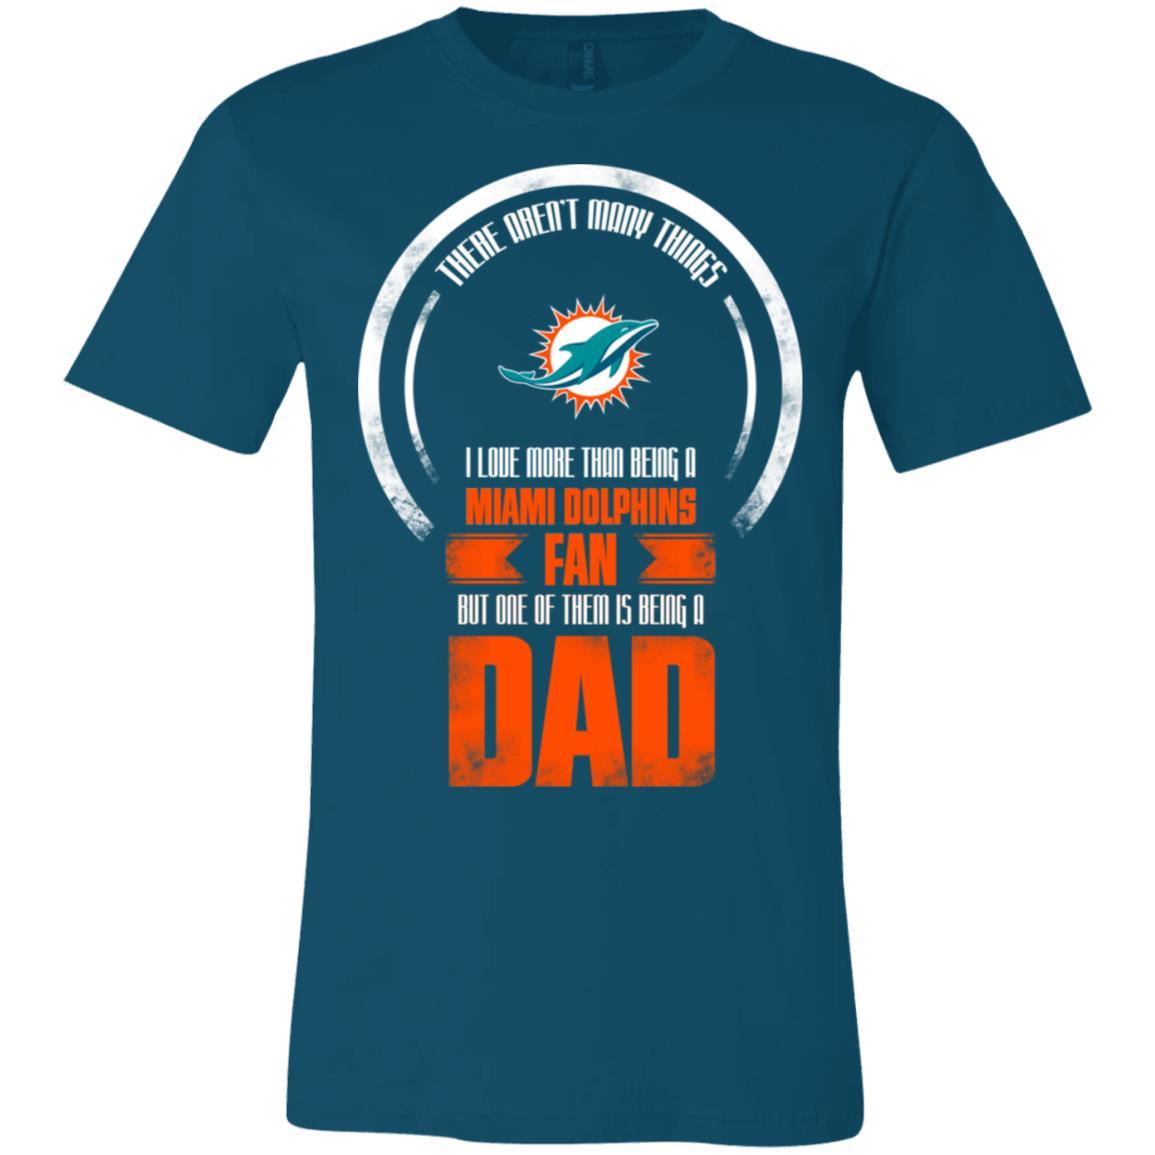 Miami Dolphins Shop - I Love More Than Being Miami Dolphins Fan Tshirt For Lover